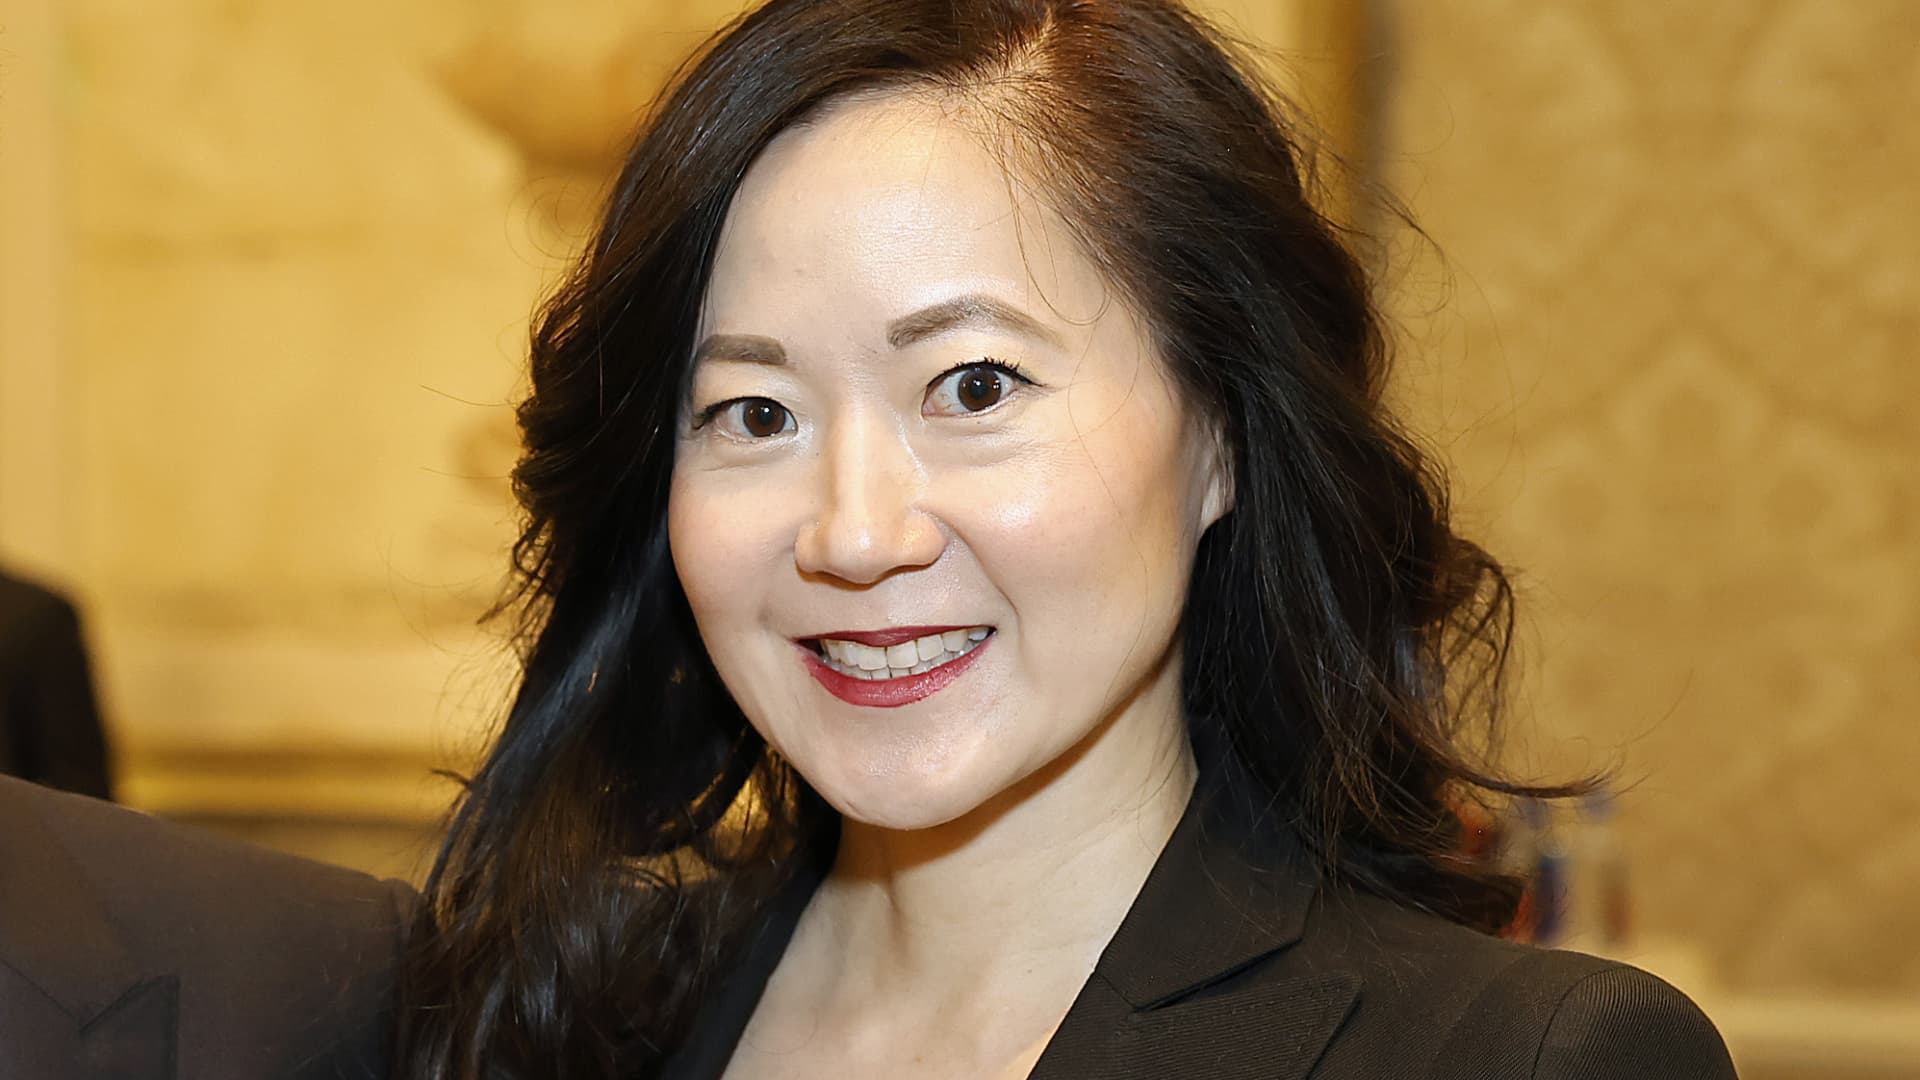 Foremost Group CEO Angela Chao was intoxicated during fatal car accident in Texas pond: police